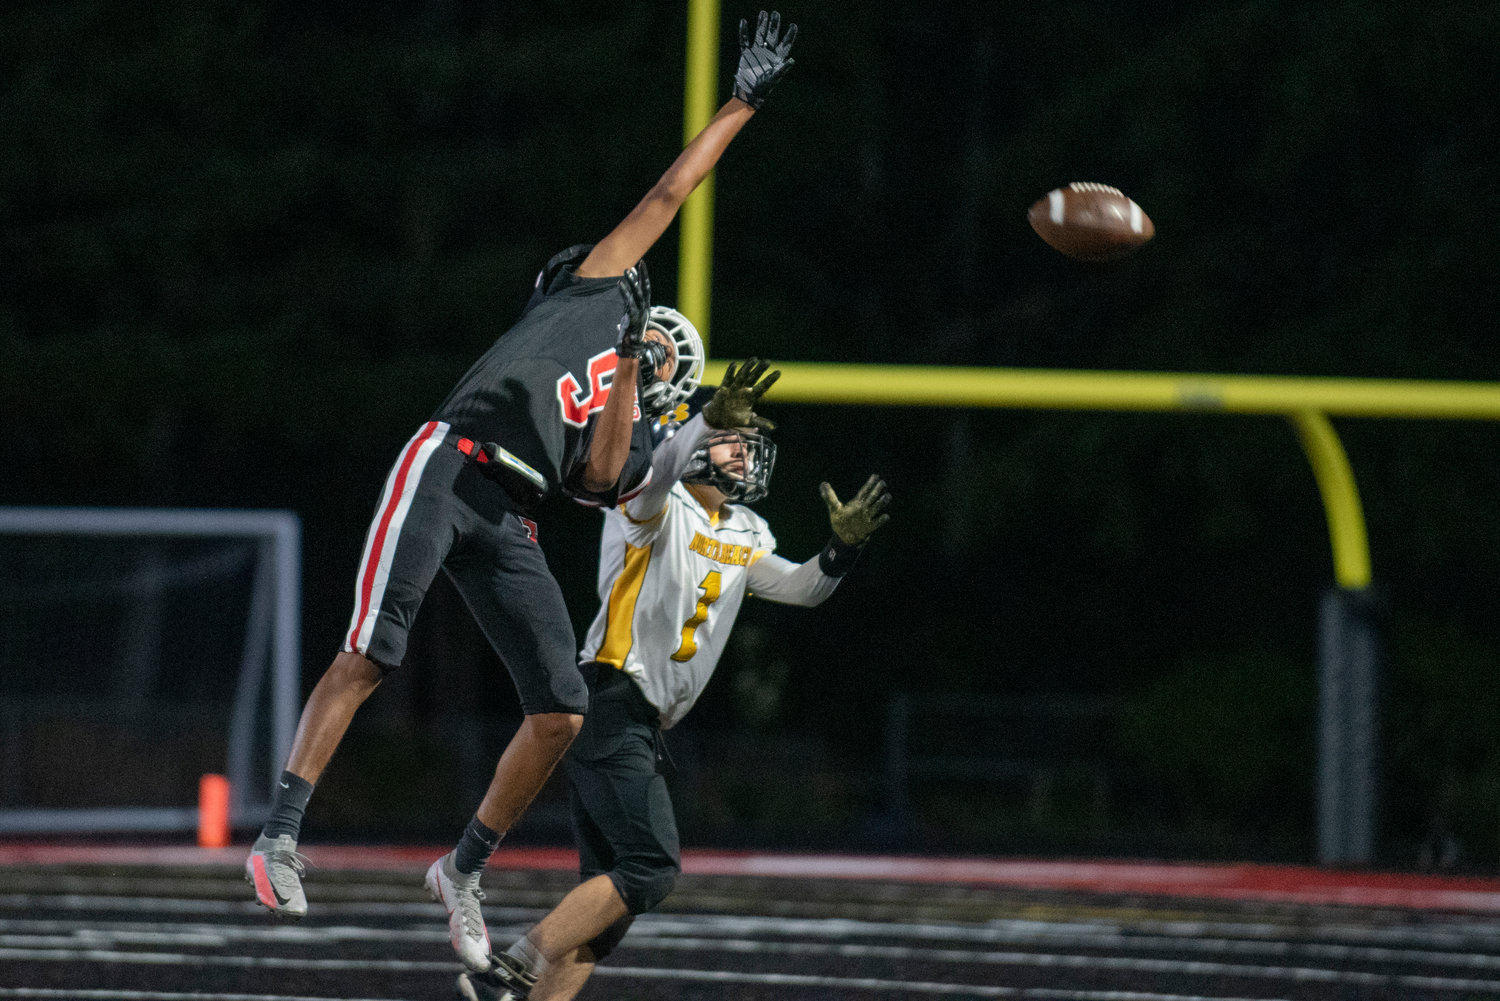 Tenino's Salvador Ontiveros (9) breaks up a pass intended for a North Beach receiver on Friday.